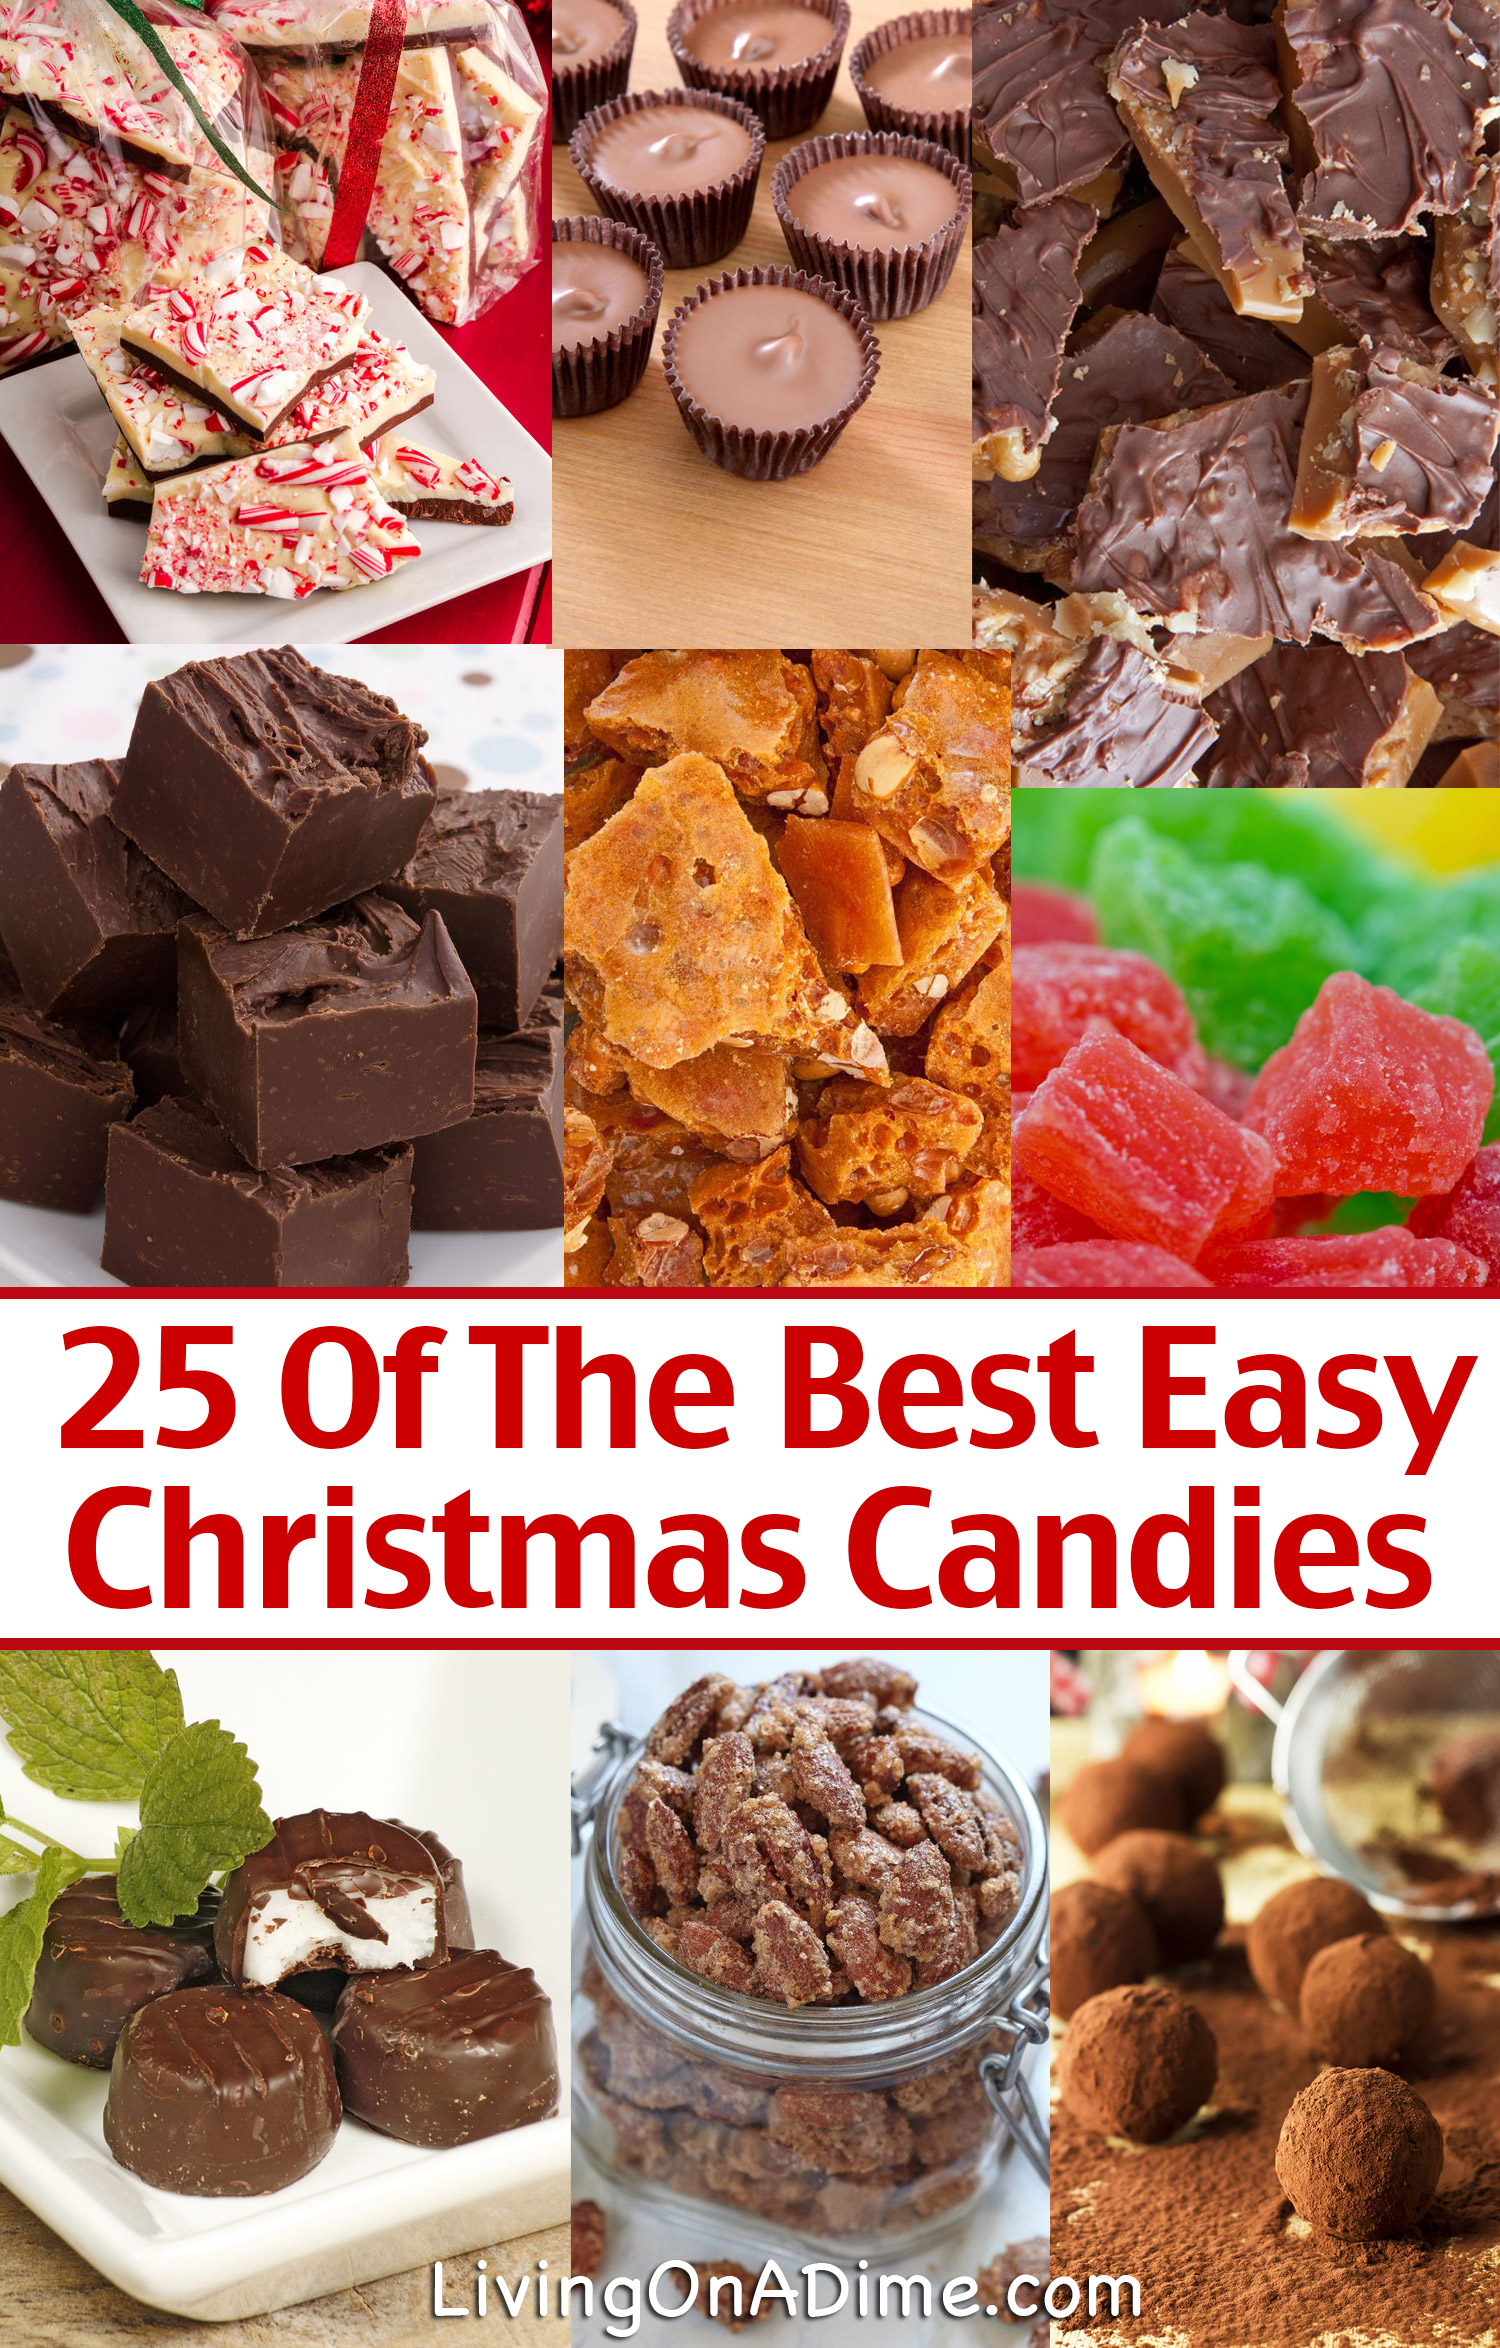 25 of the Best Easy Christmas Candy Recipes And Tips - Living on a Dime ...